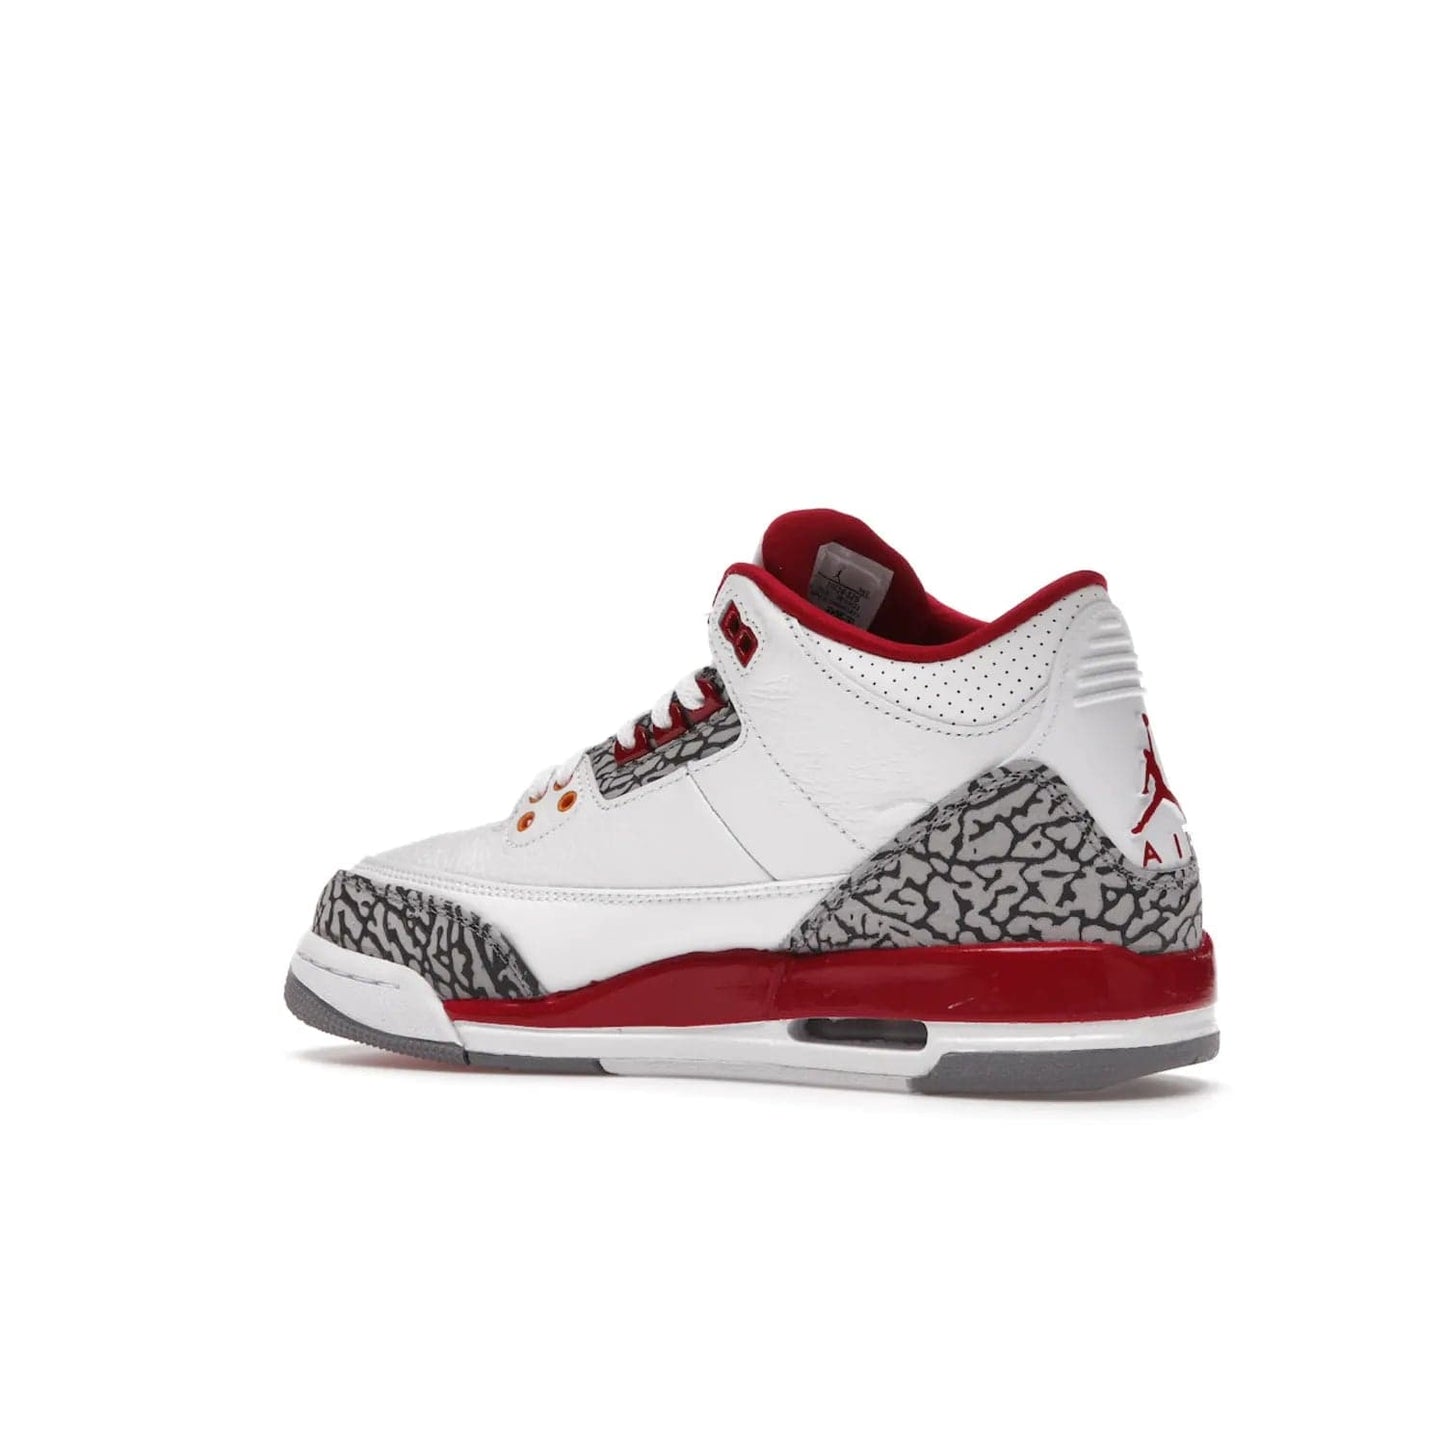 Jordan 3 Retro Cardinal (GS) - Image 22 - Only at www.BallersClubKickz.com - Shop the kid-sized Air Jordan 3 Retro Cardinal GS, released Feb 2022. White tumbled leather upper, light curry accenting, cement grey and classic red details throughout. Visible Air cushioning, midsole, and an eye-catching outsole. Show off your style with this fashionable streetwear silhouette.